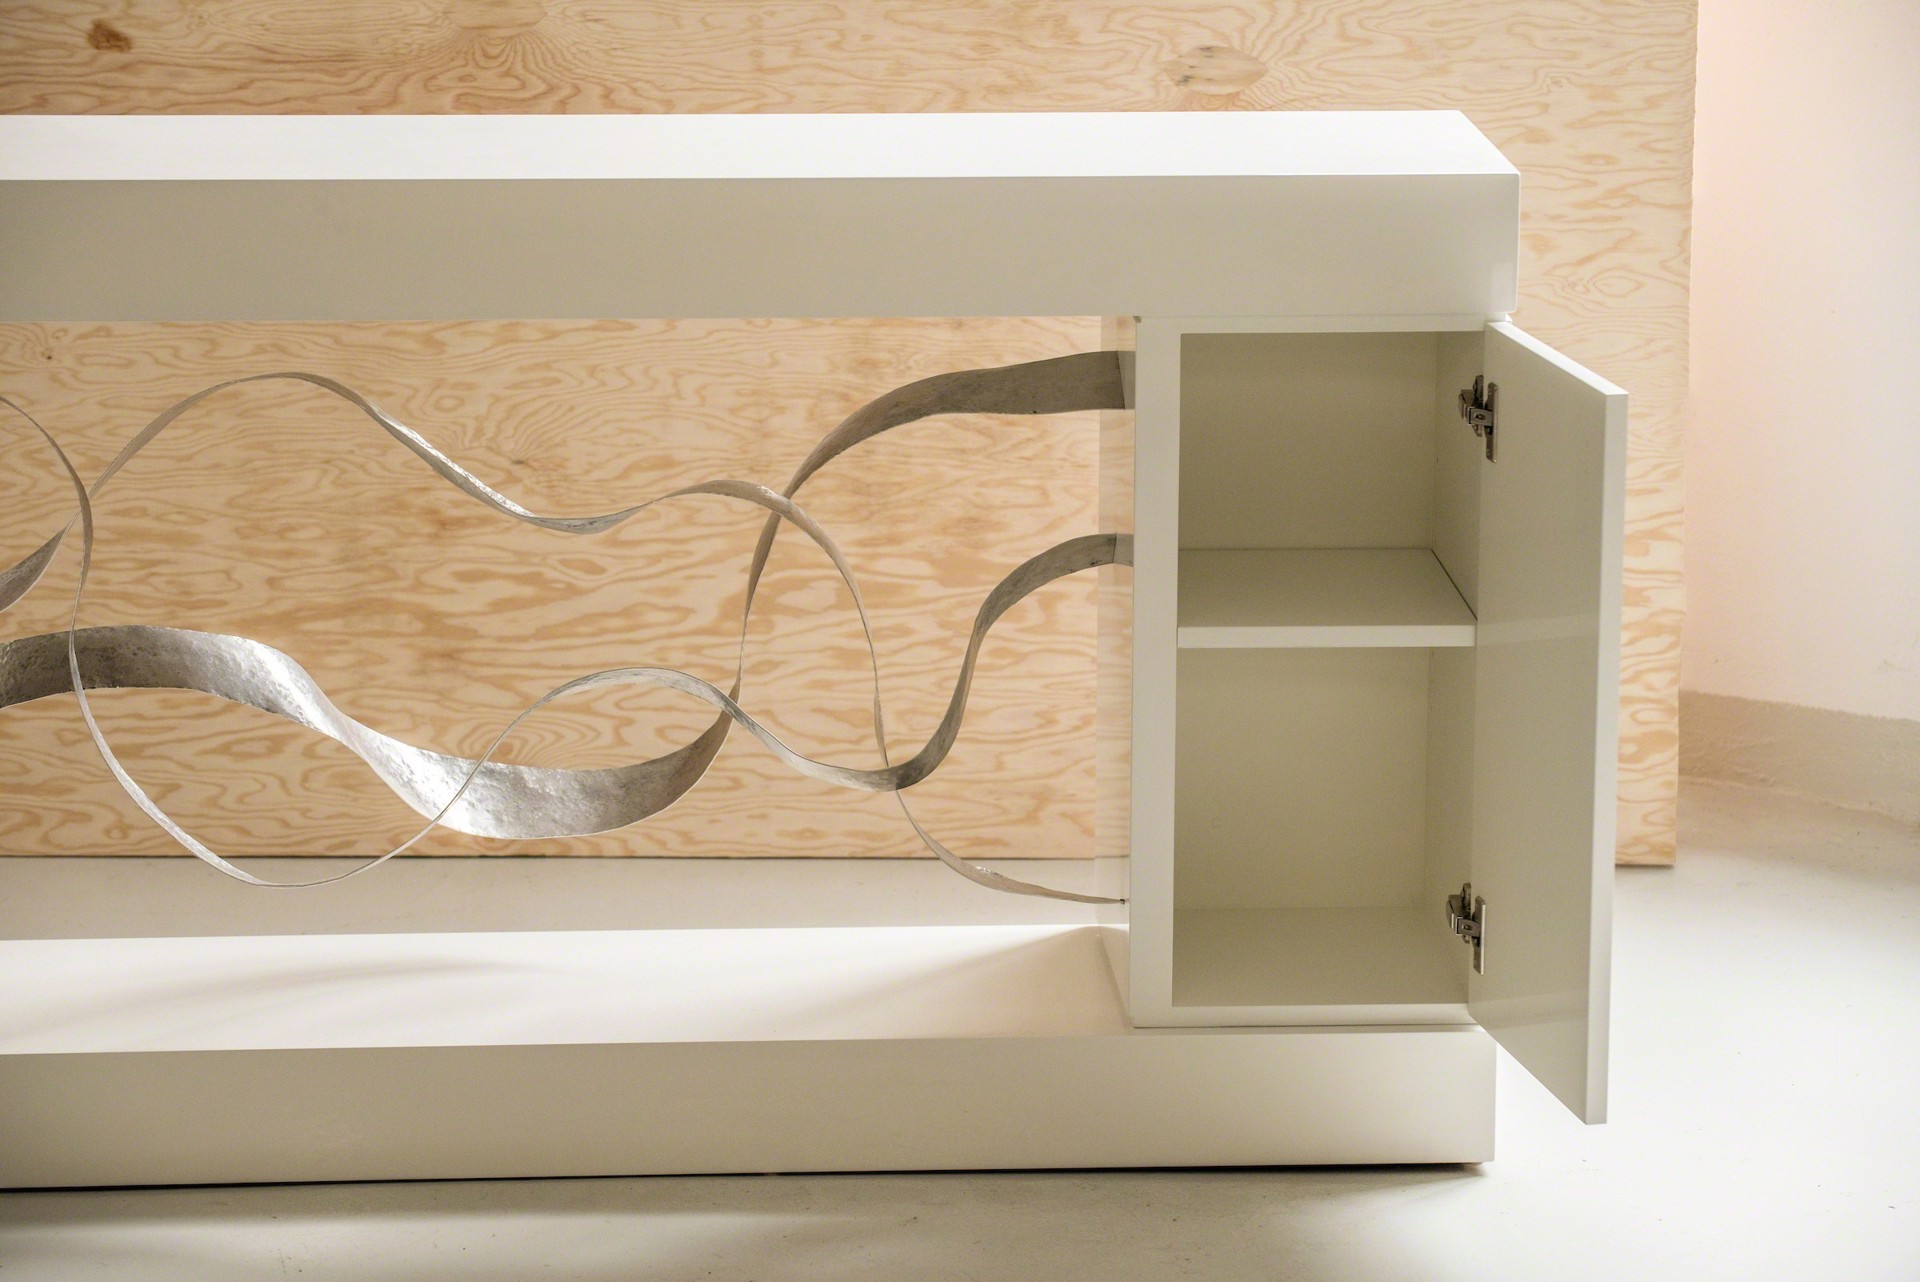 Cabinet-console "Waves" by Jacques Jarrige